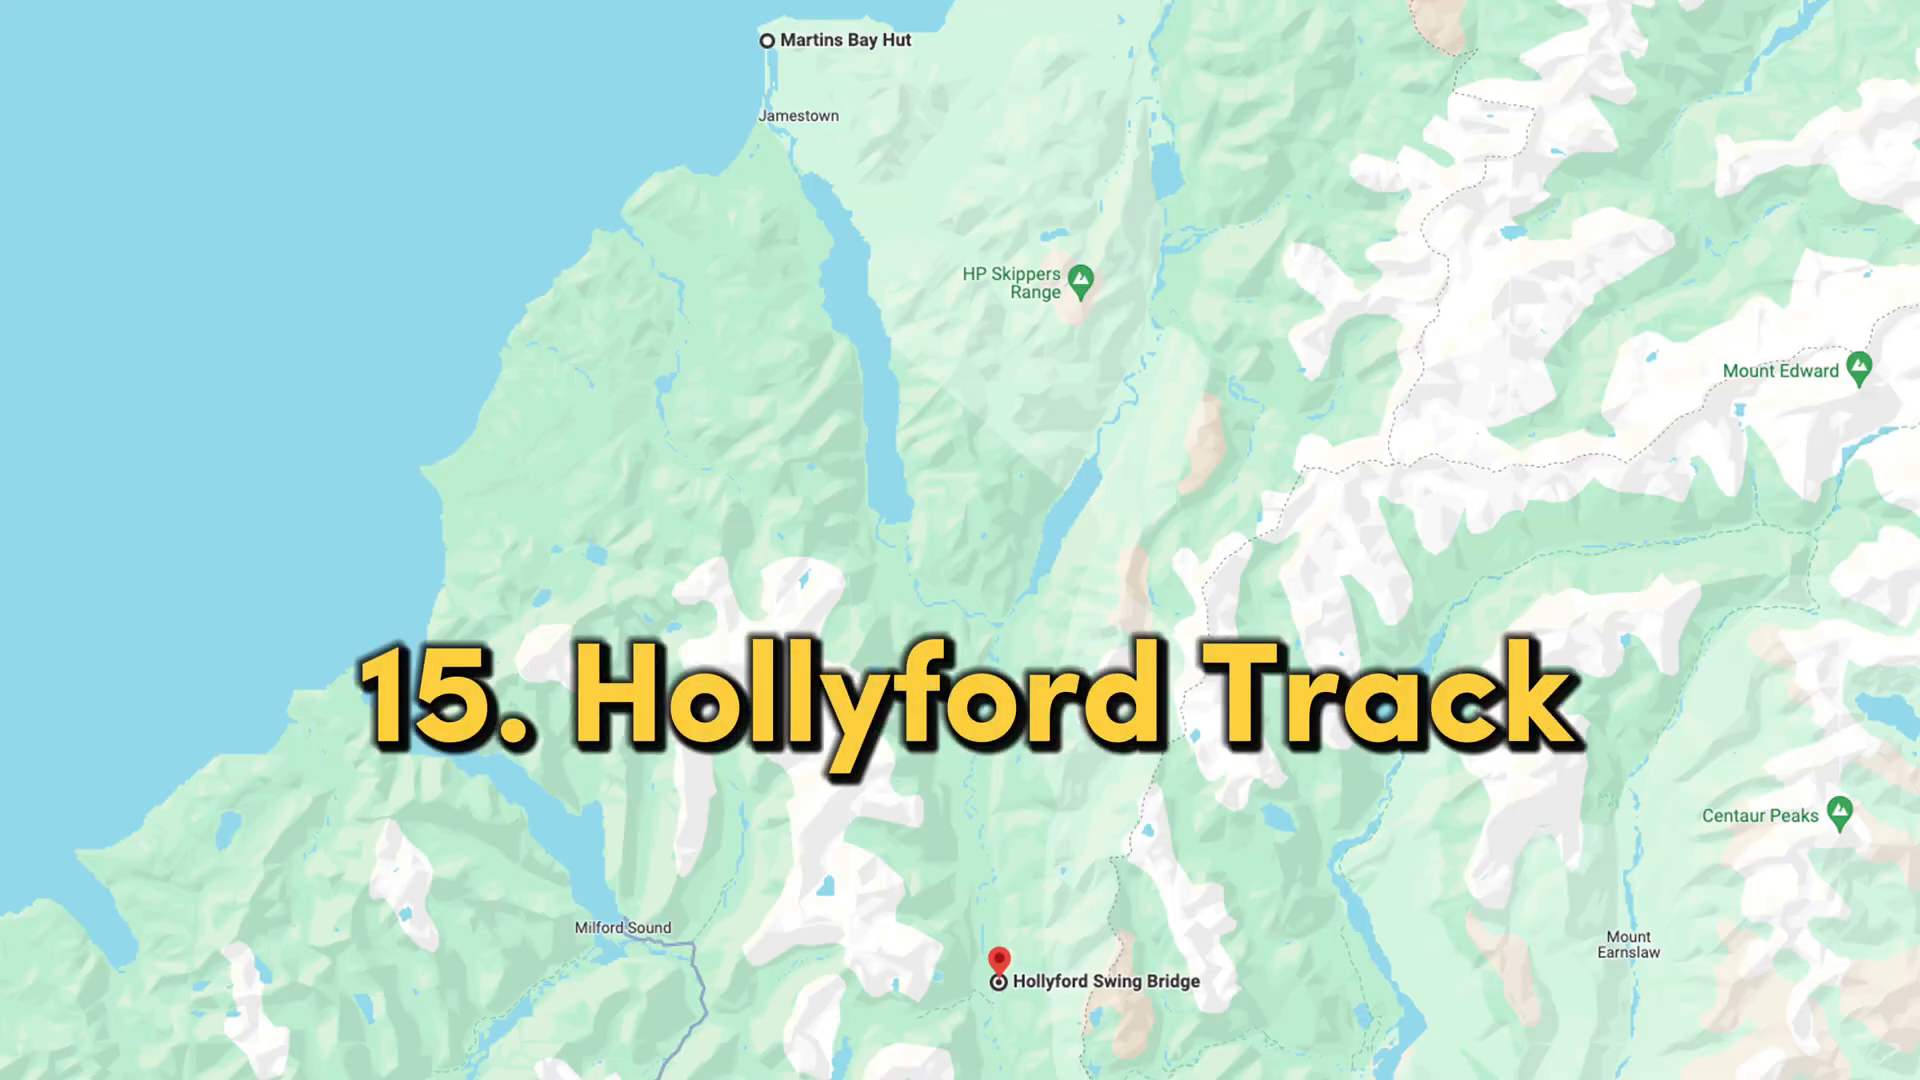 The Hollyford Track is one of the best hikes in the Fiordland National Park